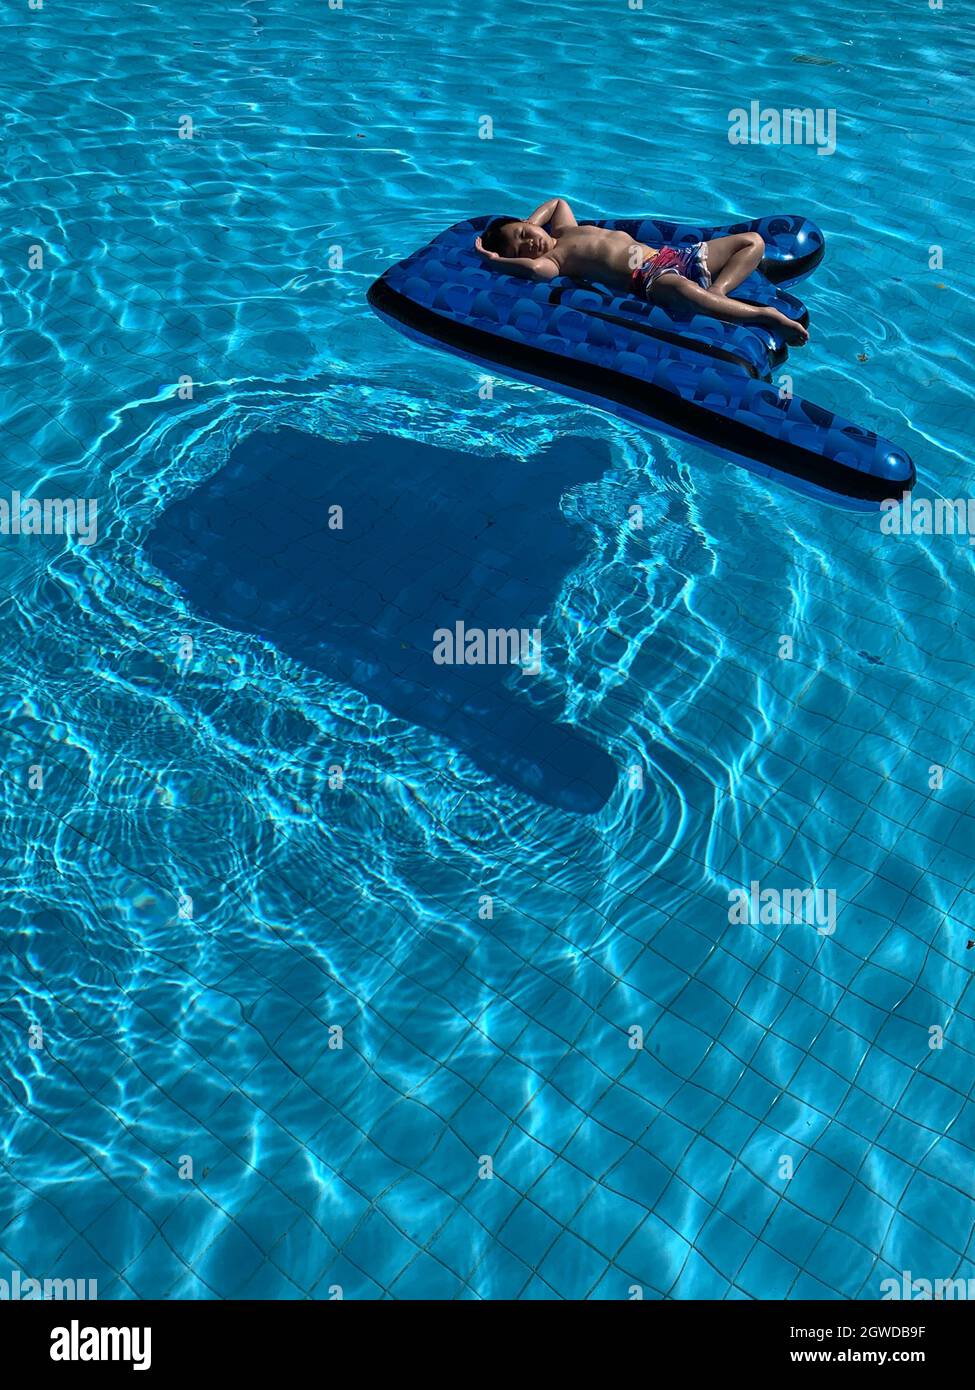 High Angle View Of Man Swimming In Pool Stock Photo